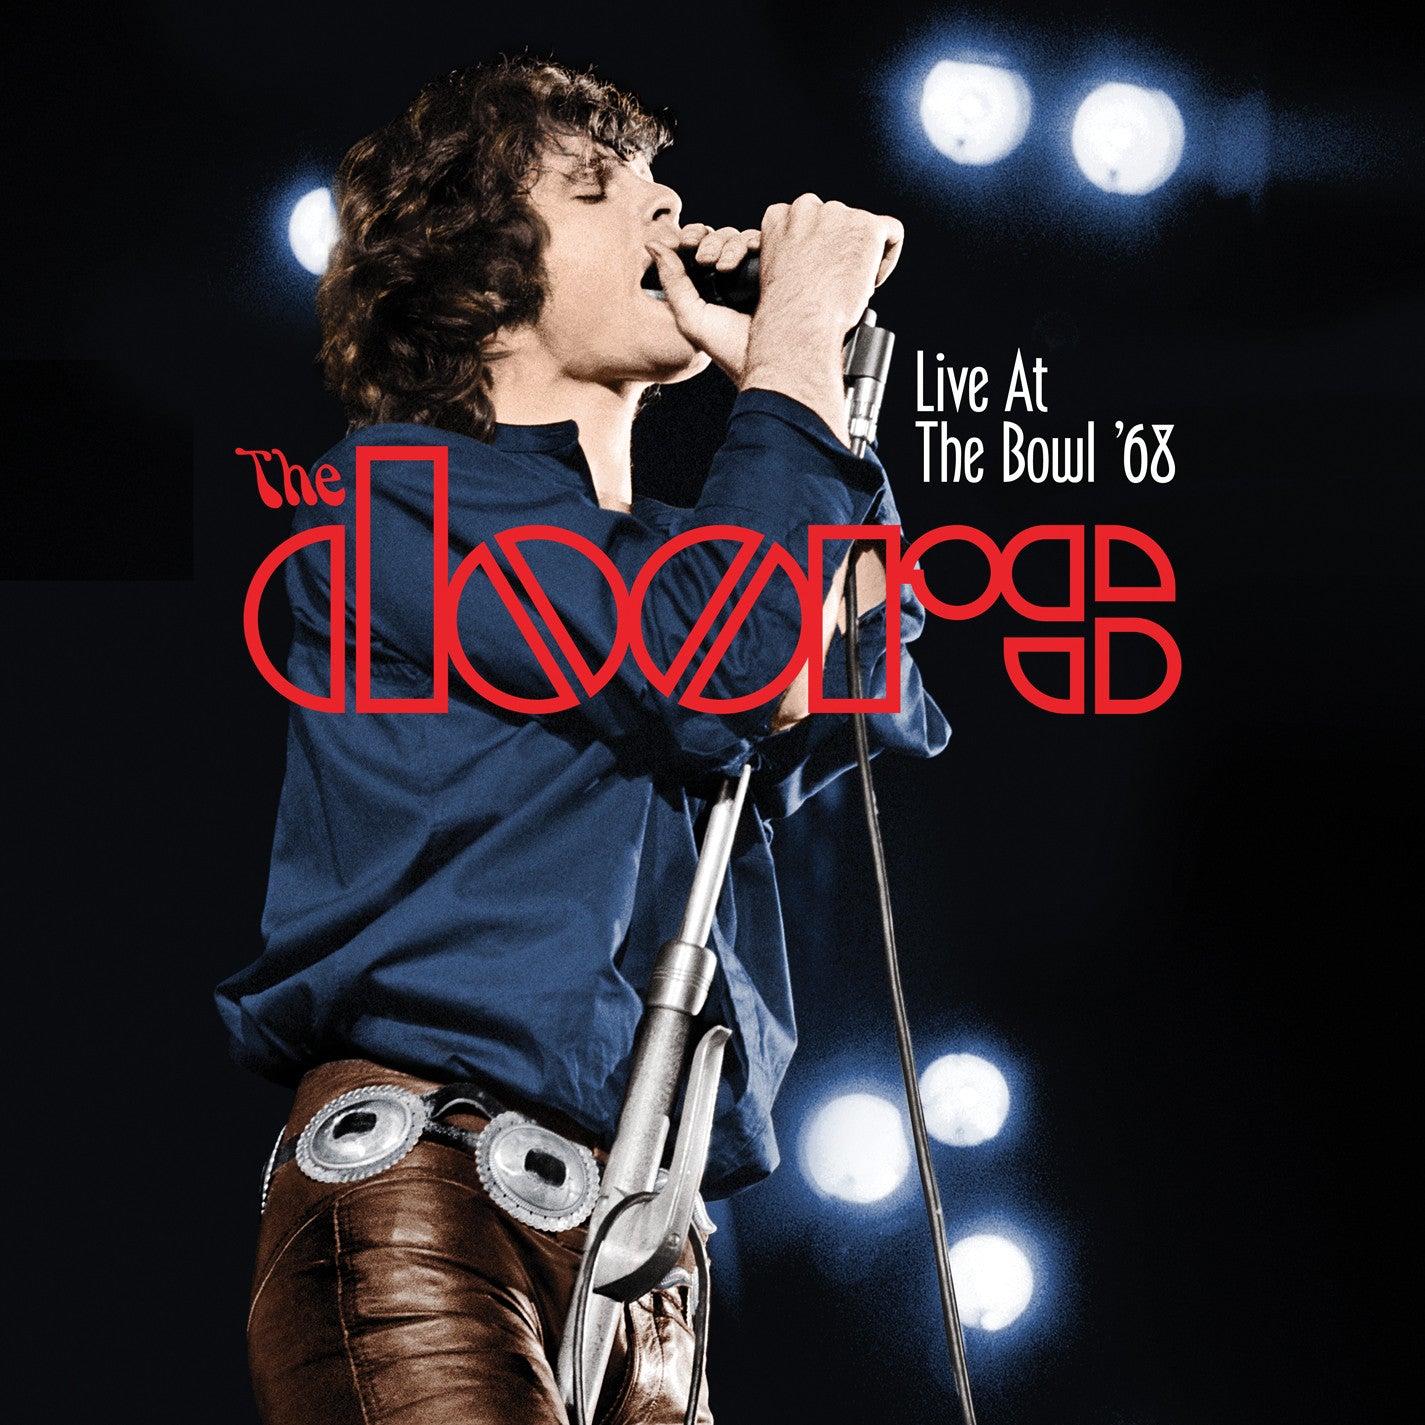 The Live At The Bowl '68 [CD] Historic Performance